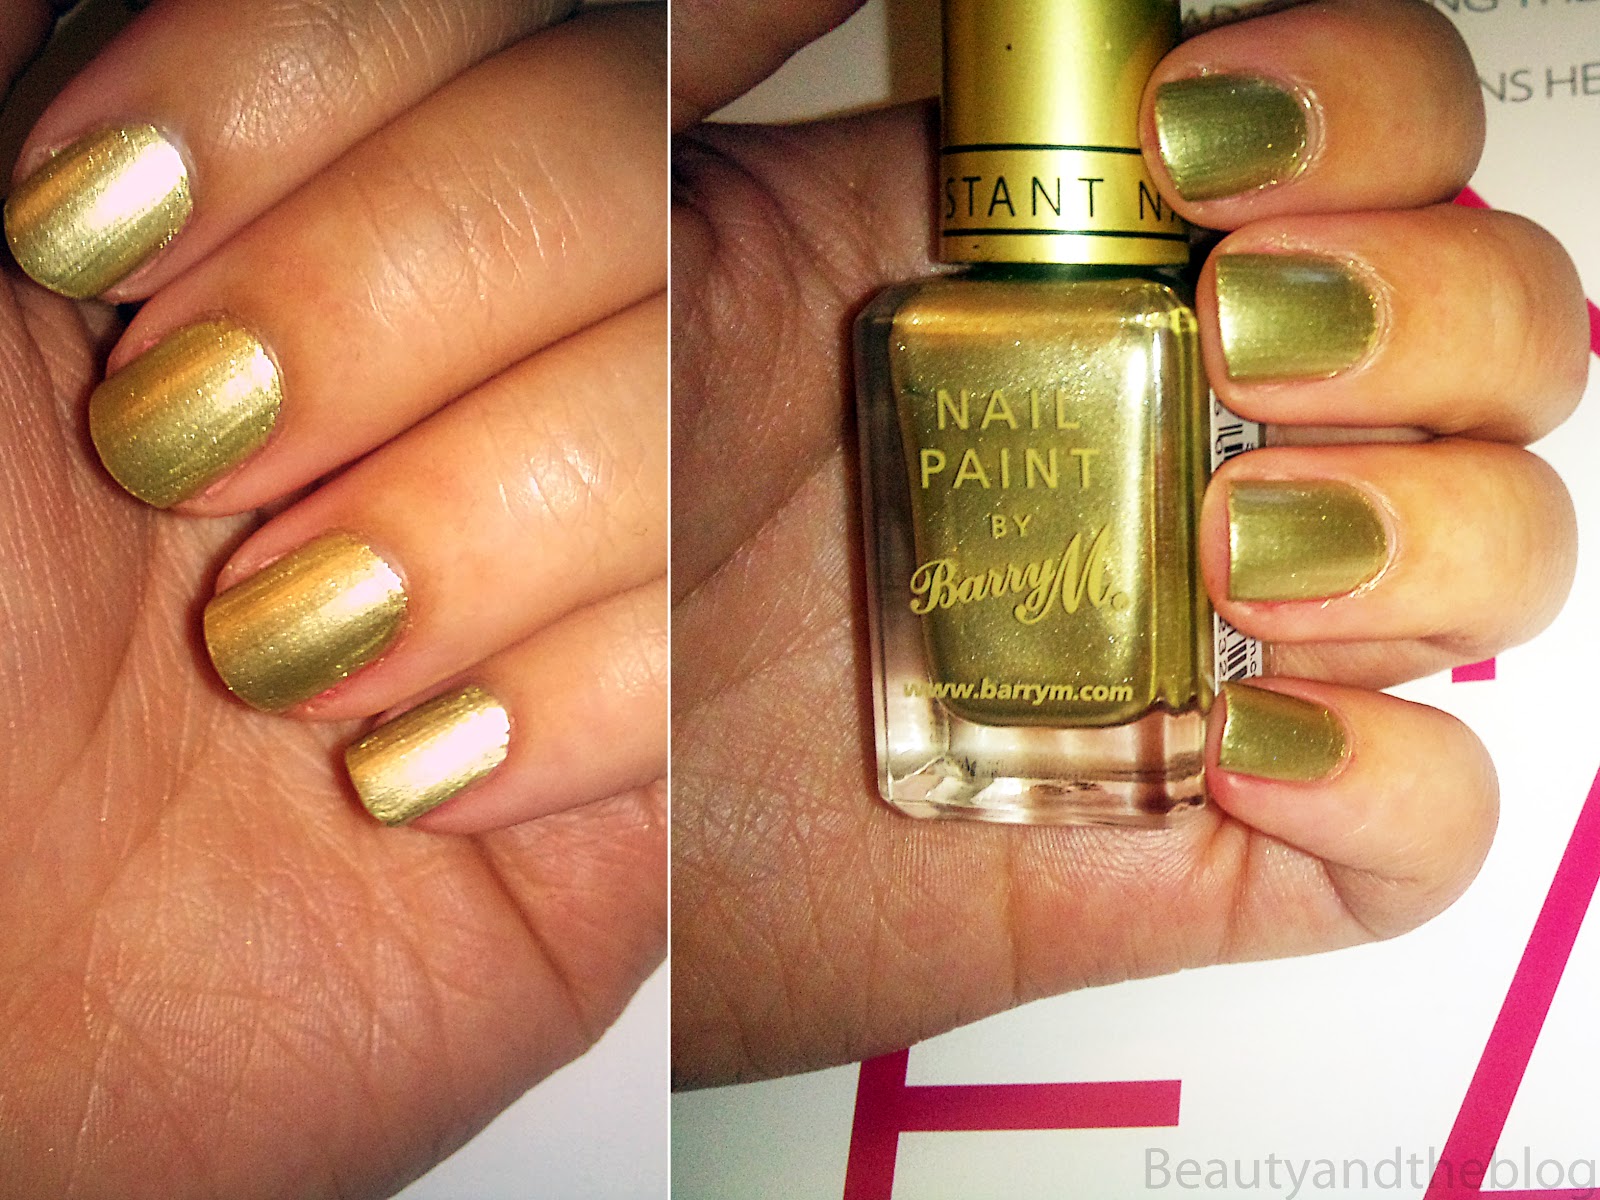 So when I had seen that Barry M released yet another nail effect I thought I